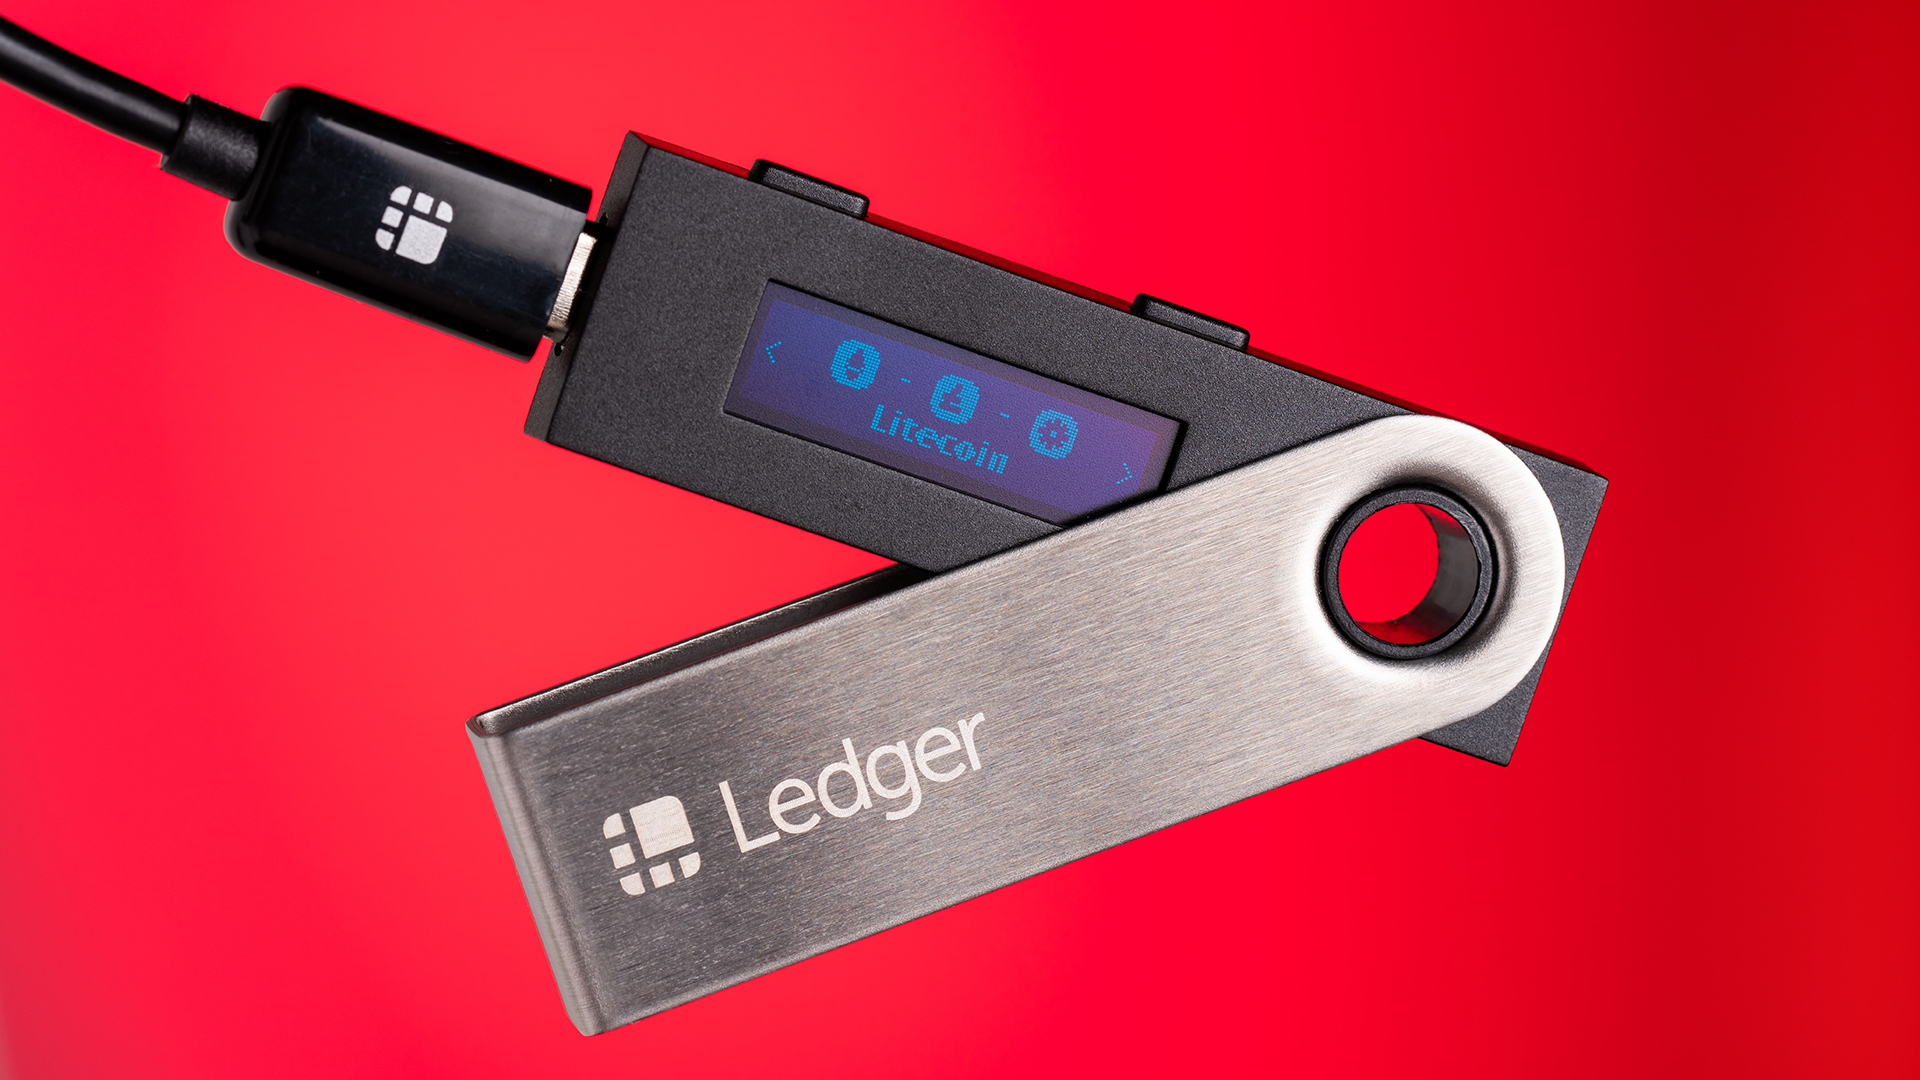 The Ledger Nano S is a vault for your cryptocurrency - Newegg Insider